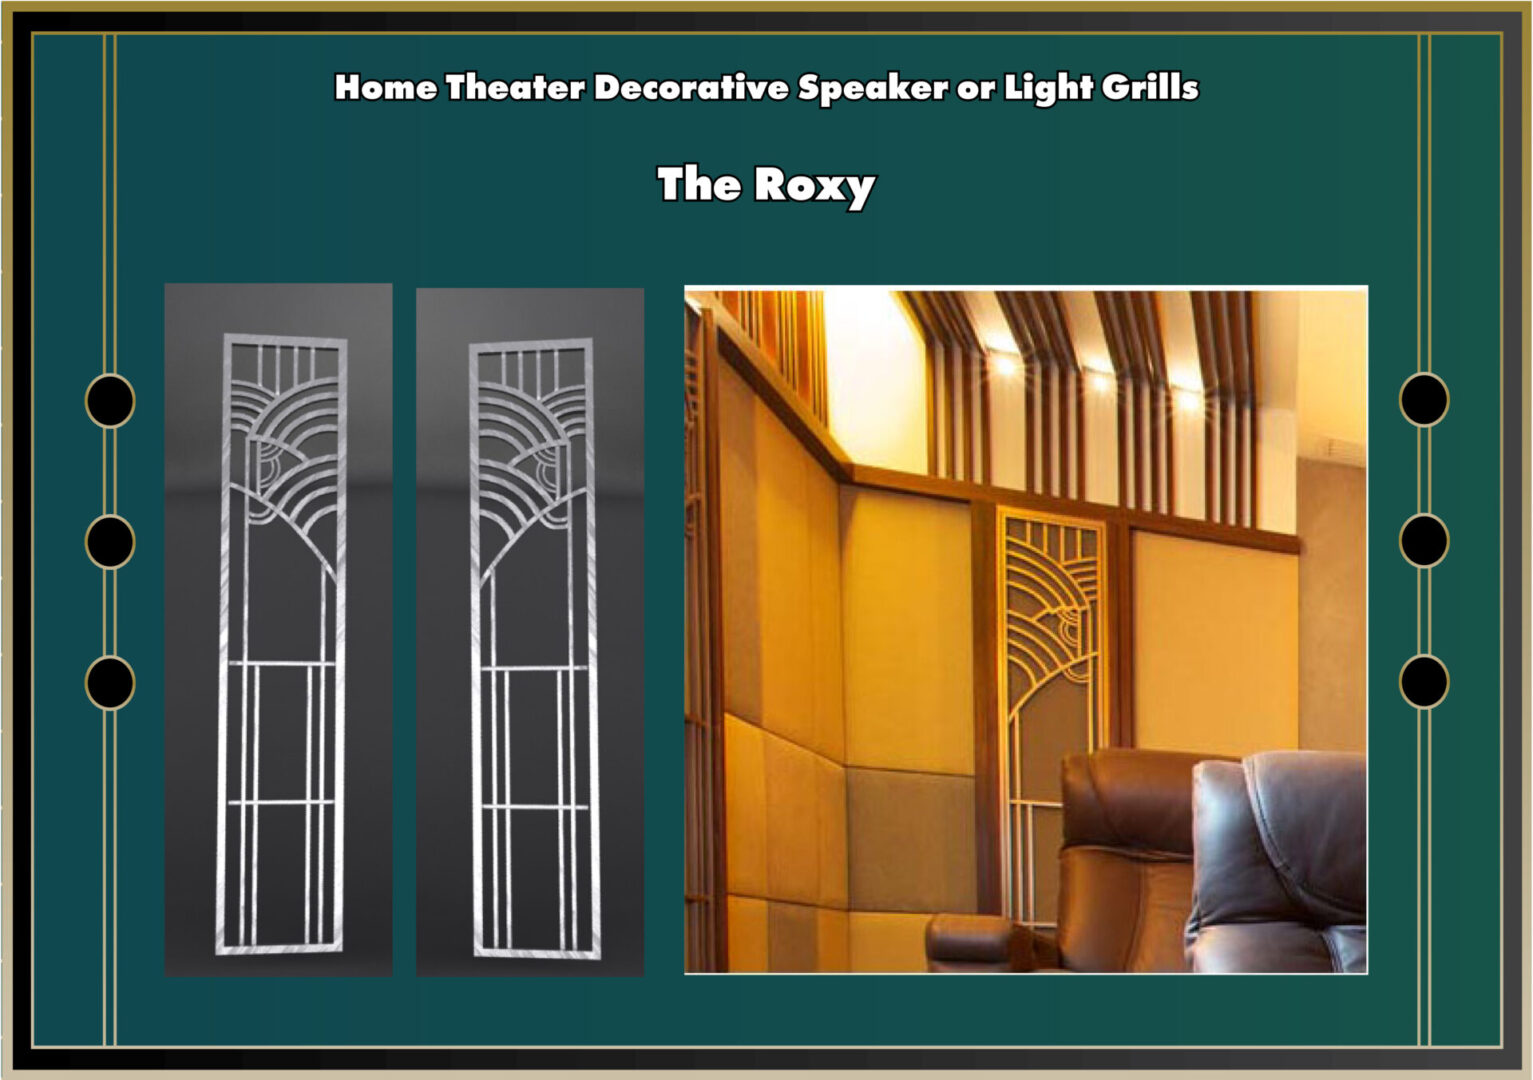 Home Theater with Decorative Speaker and Light Grills